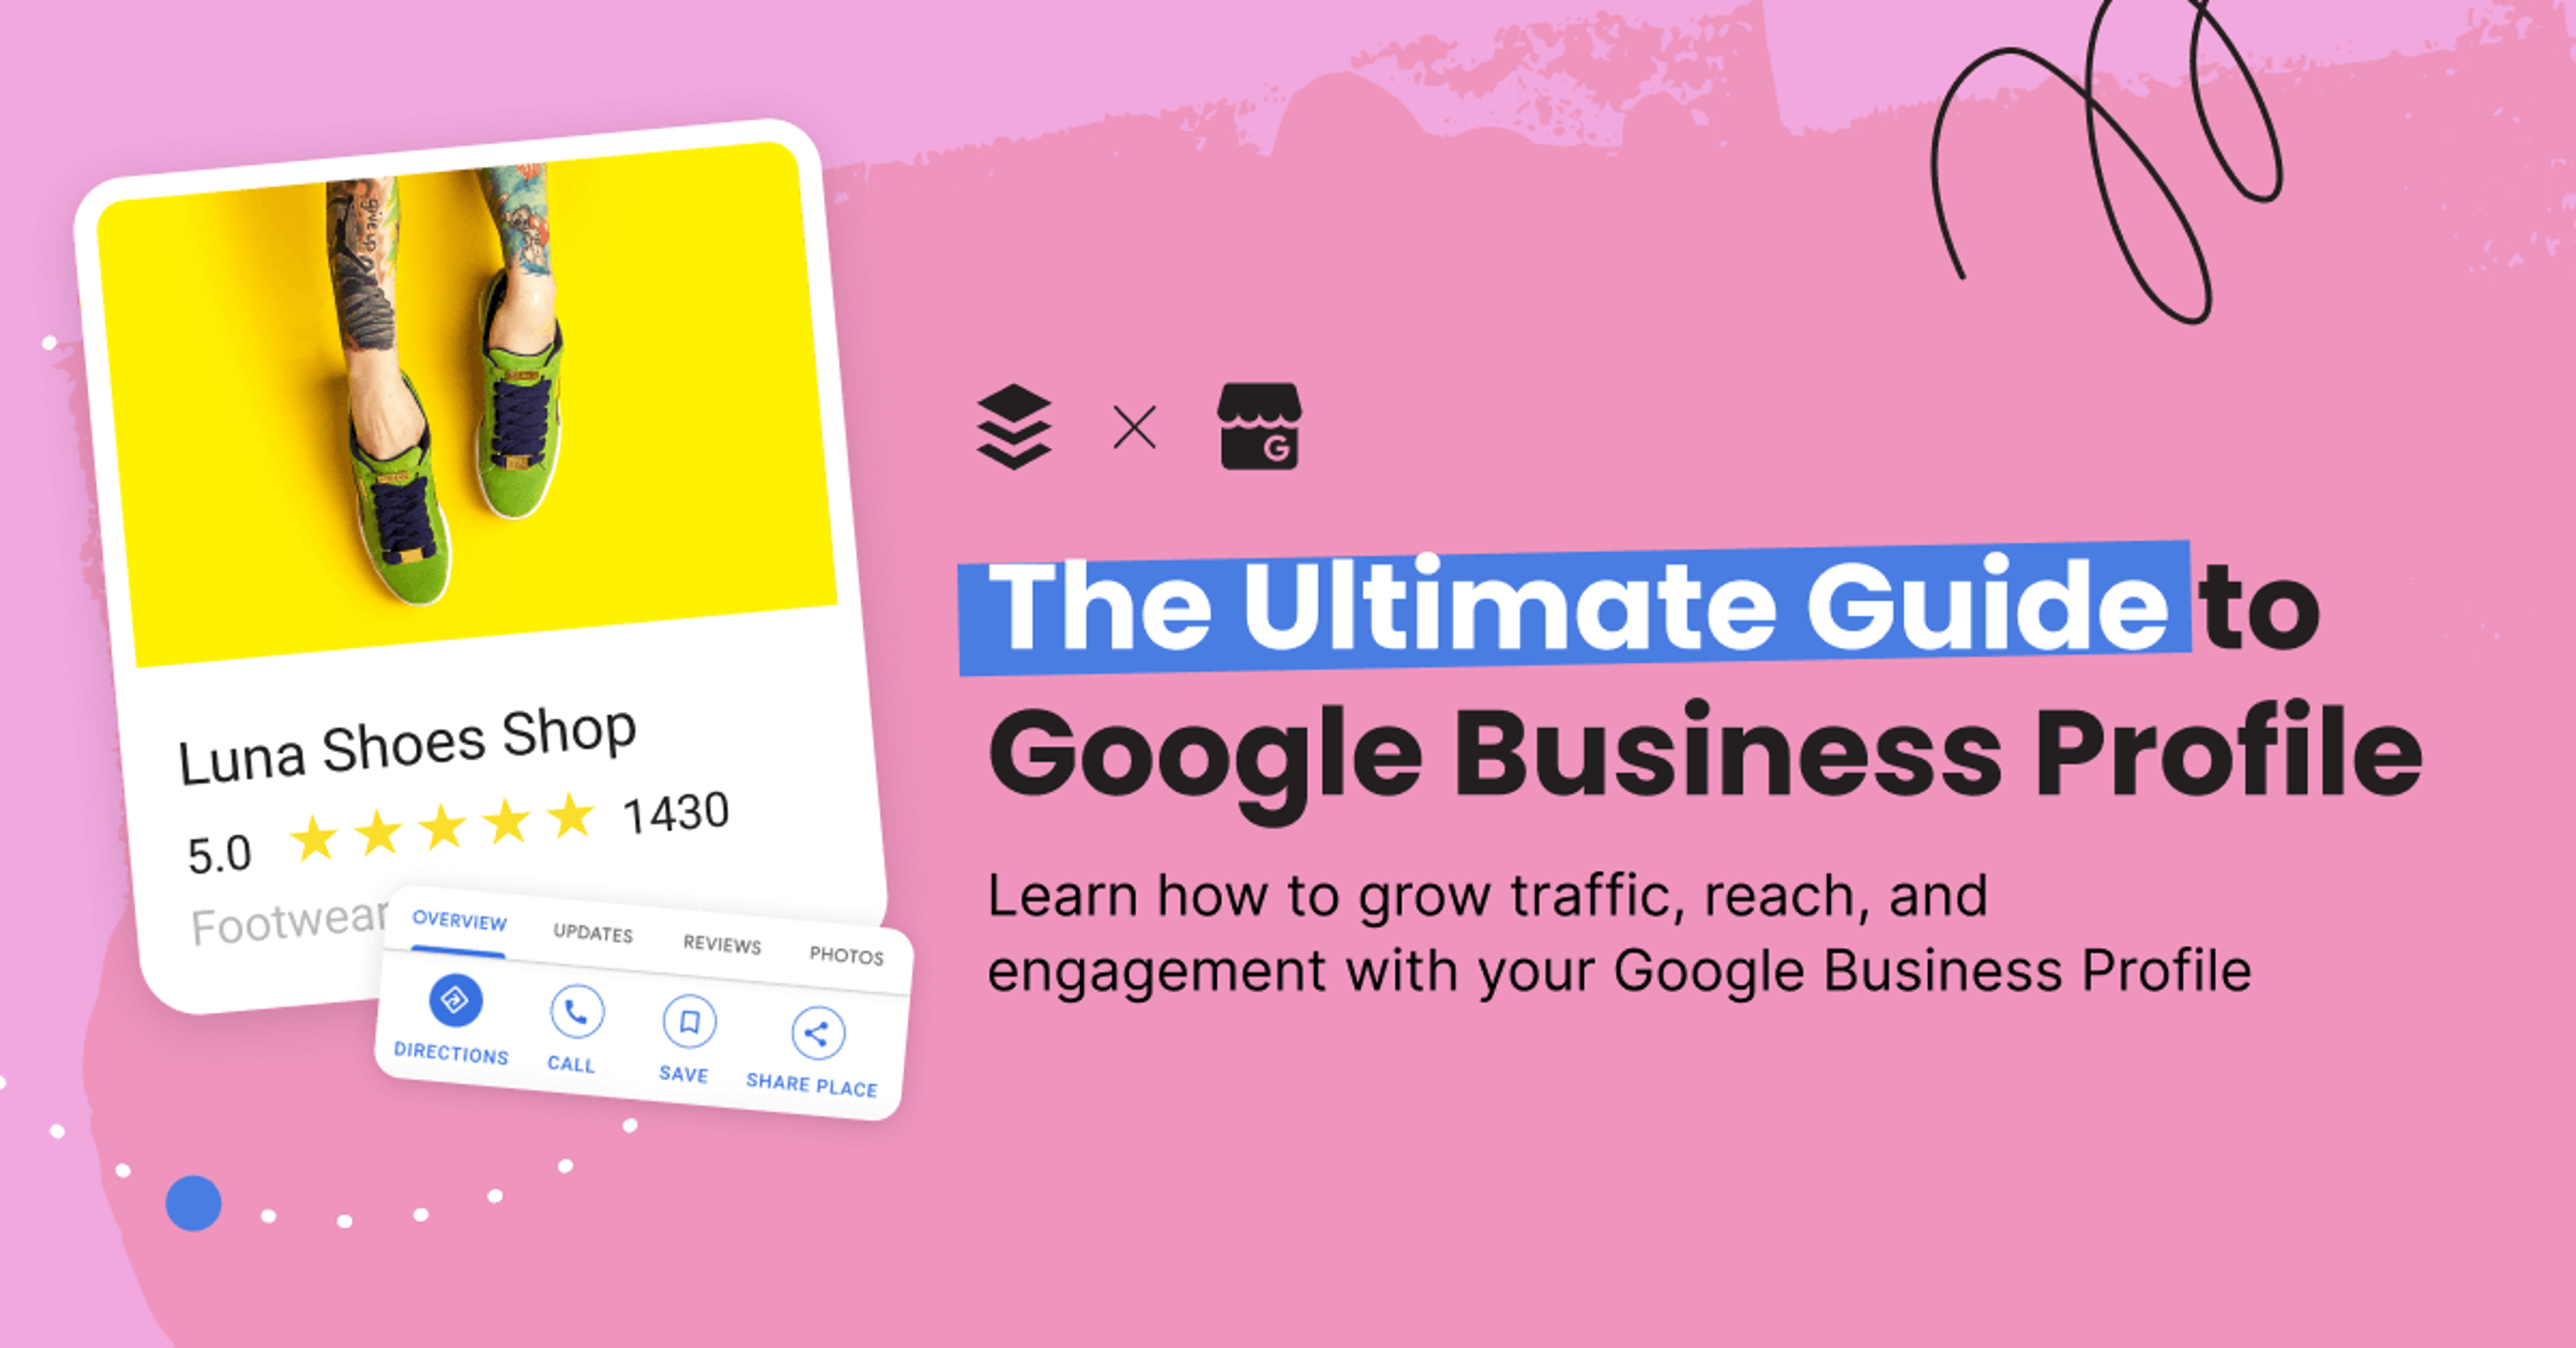 The Ultimate Guide to Google Business Profile